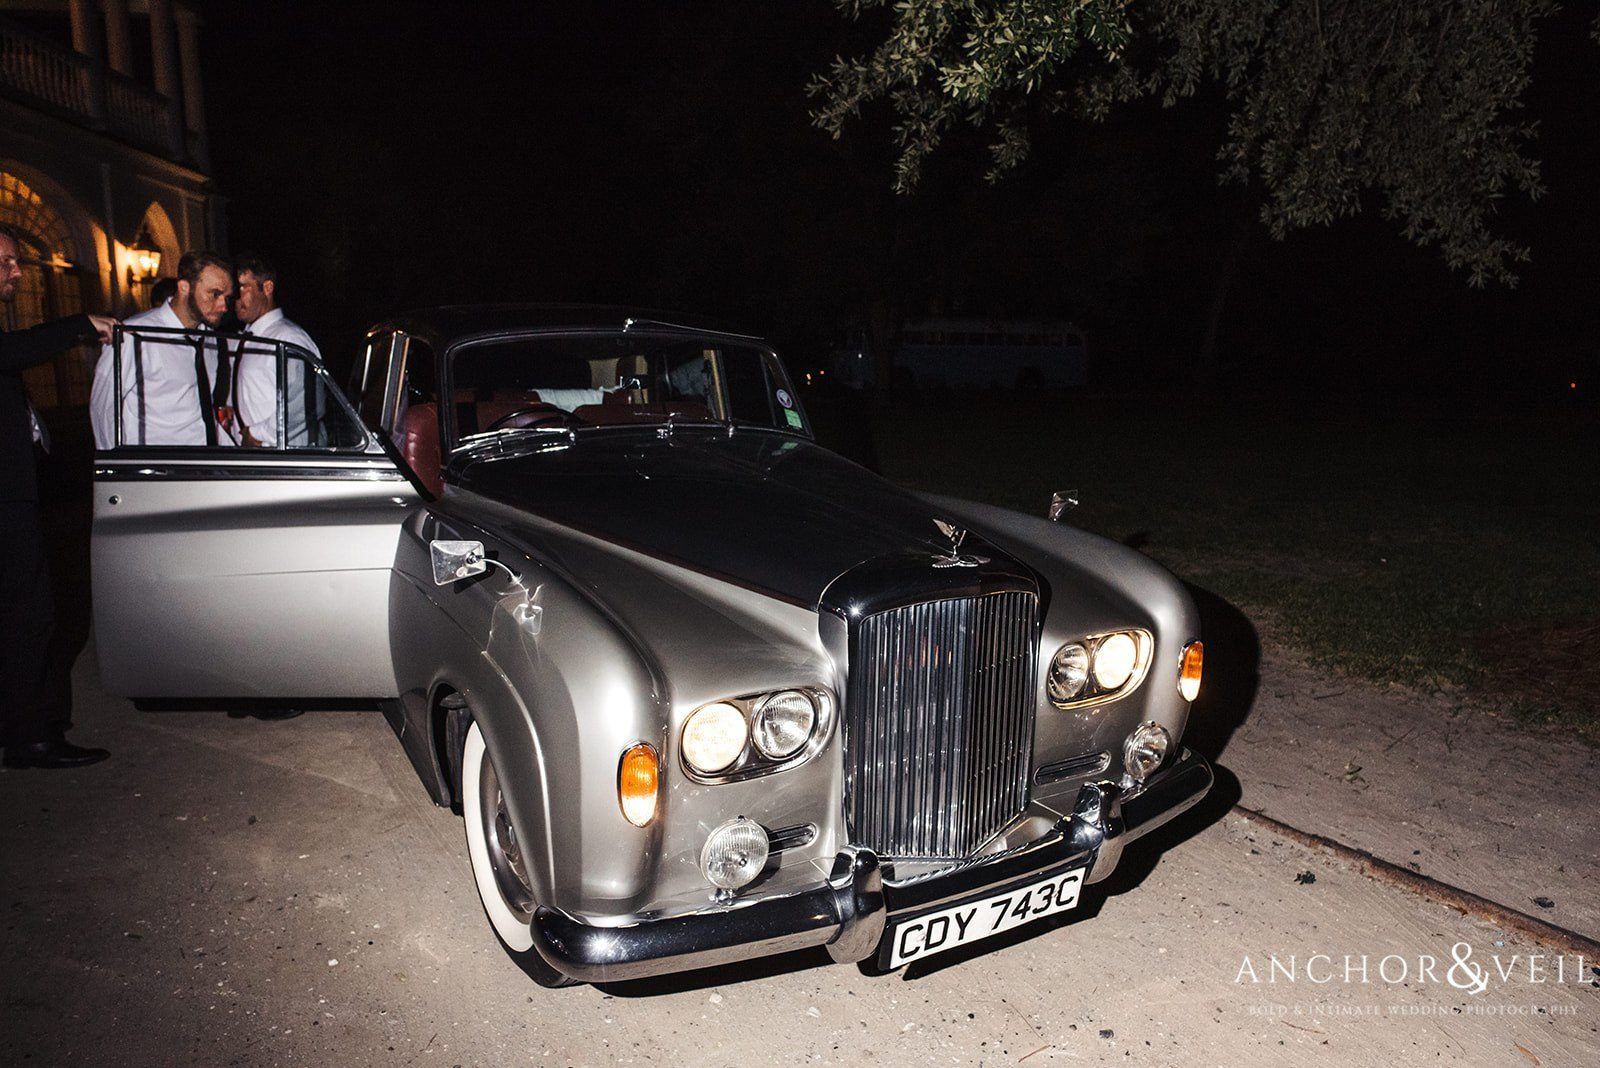 The Rolls Royce the exit of the wedding.